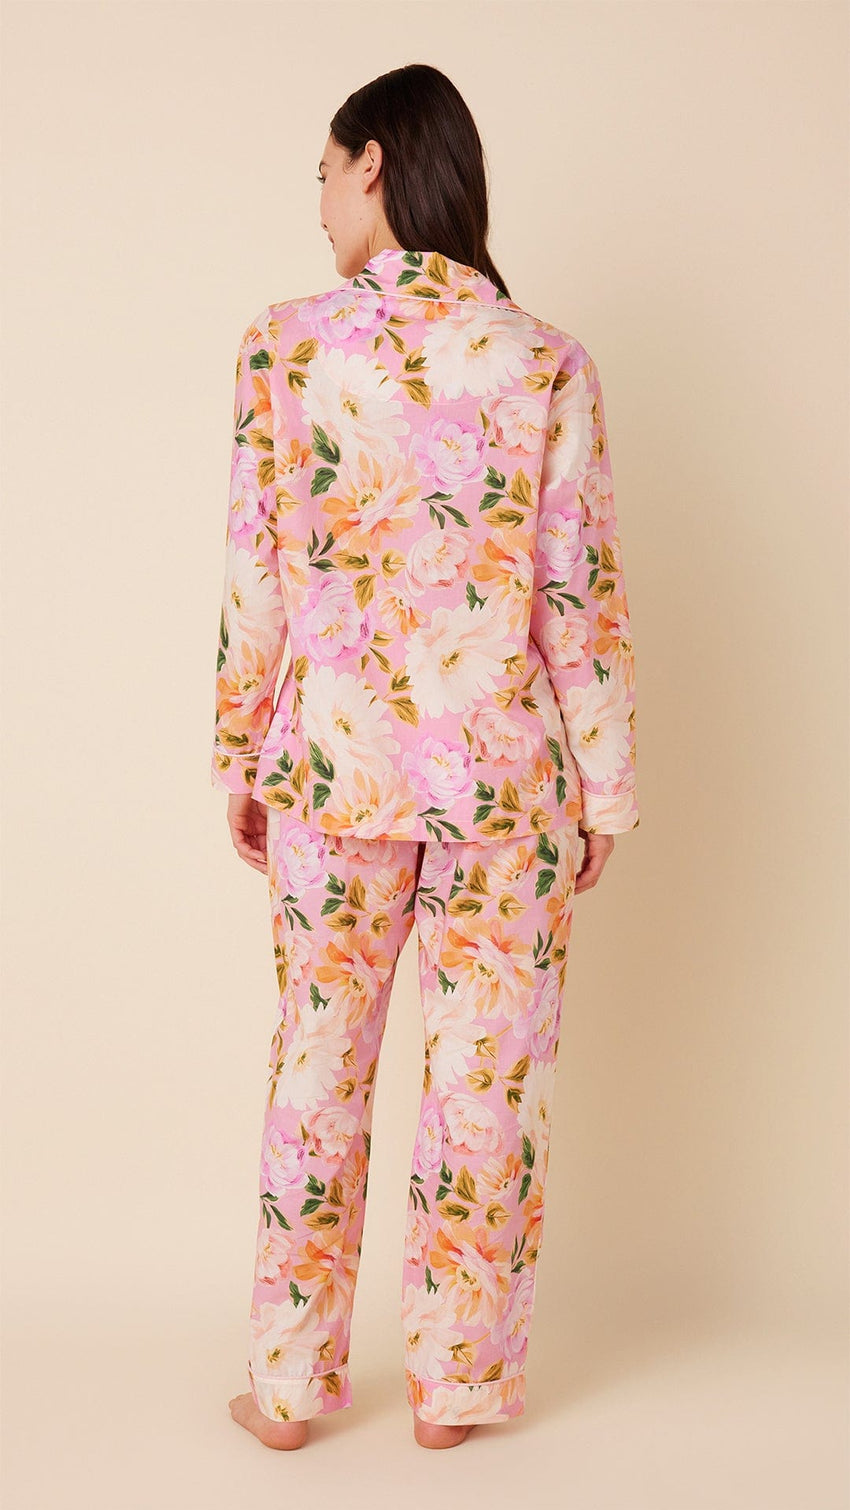 Blush Rose Luxe Pima Long-Sleeved Pajama Hover Pink